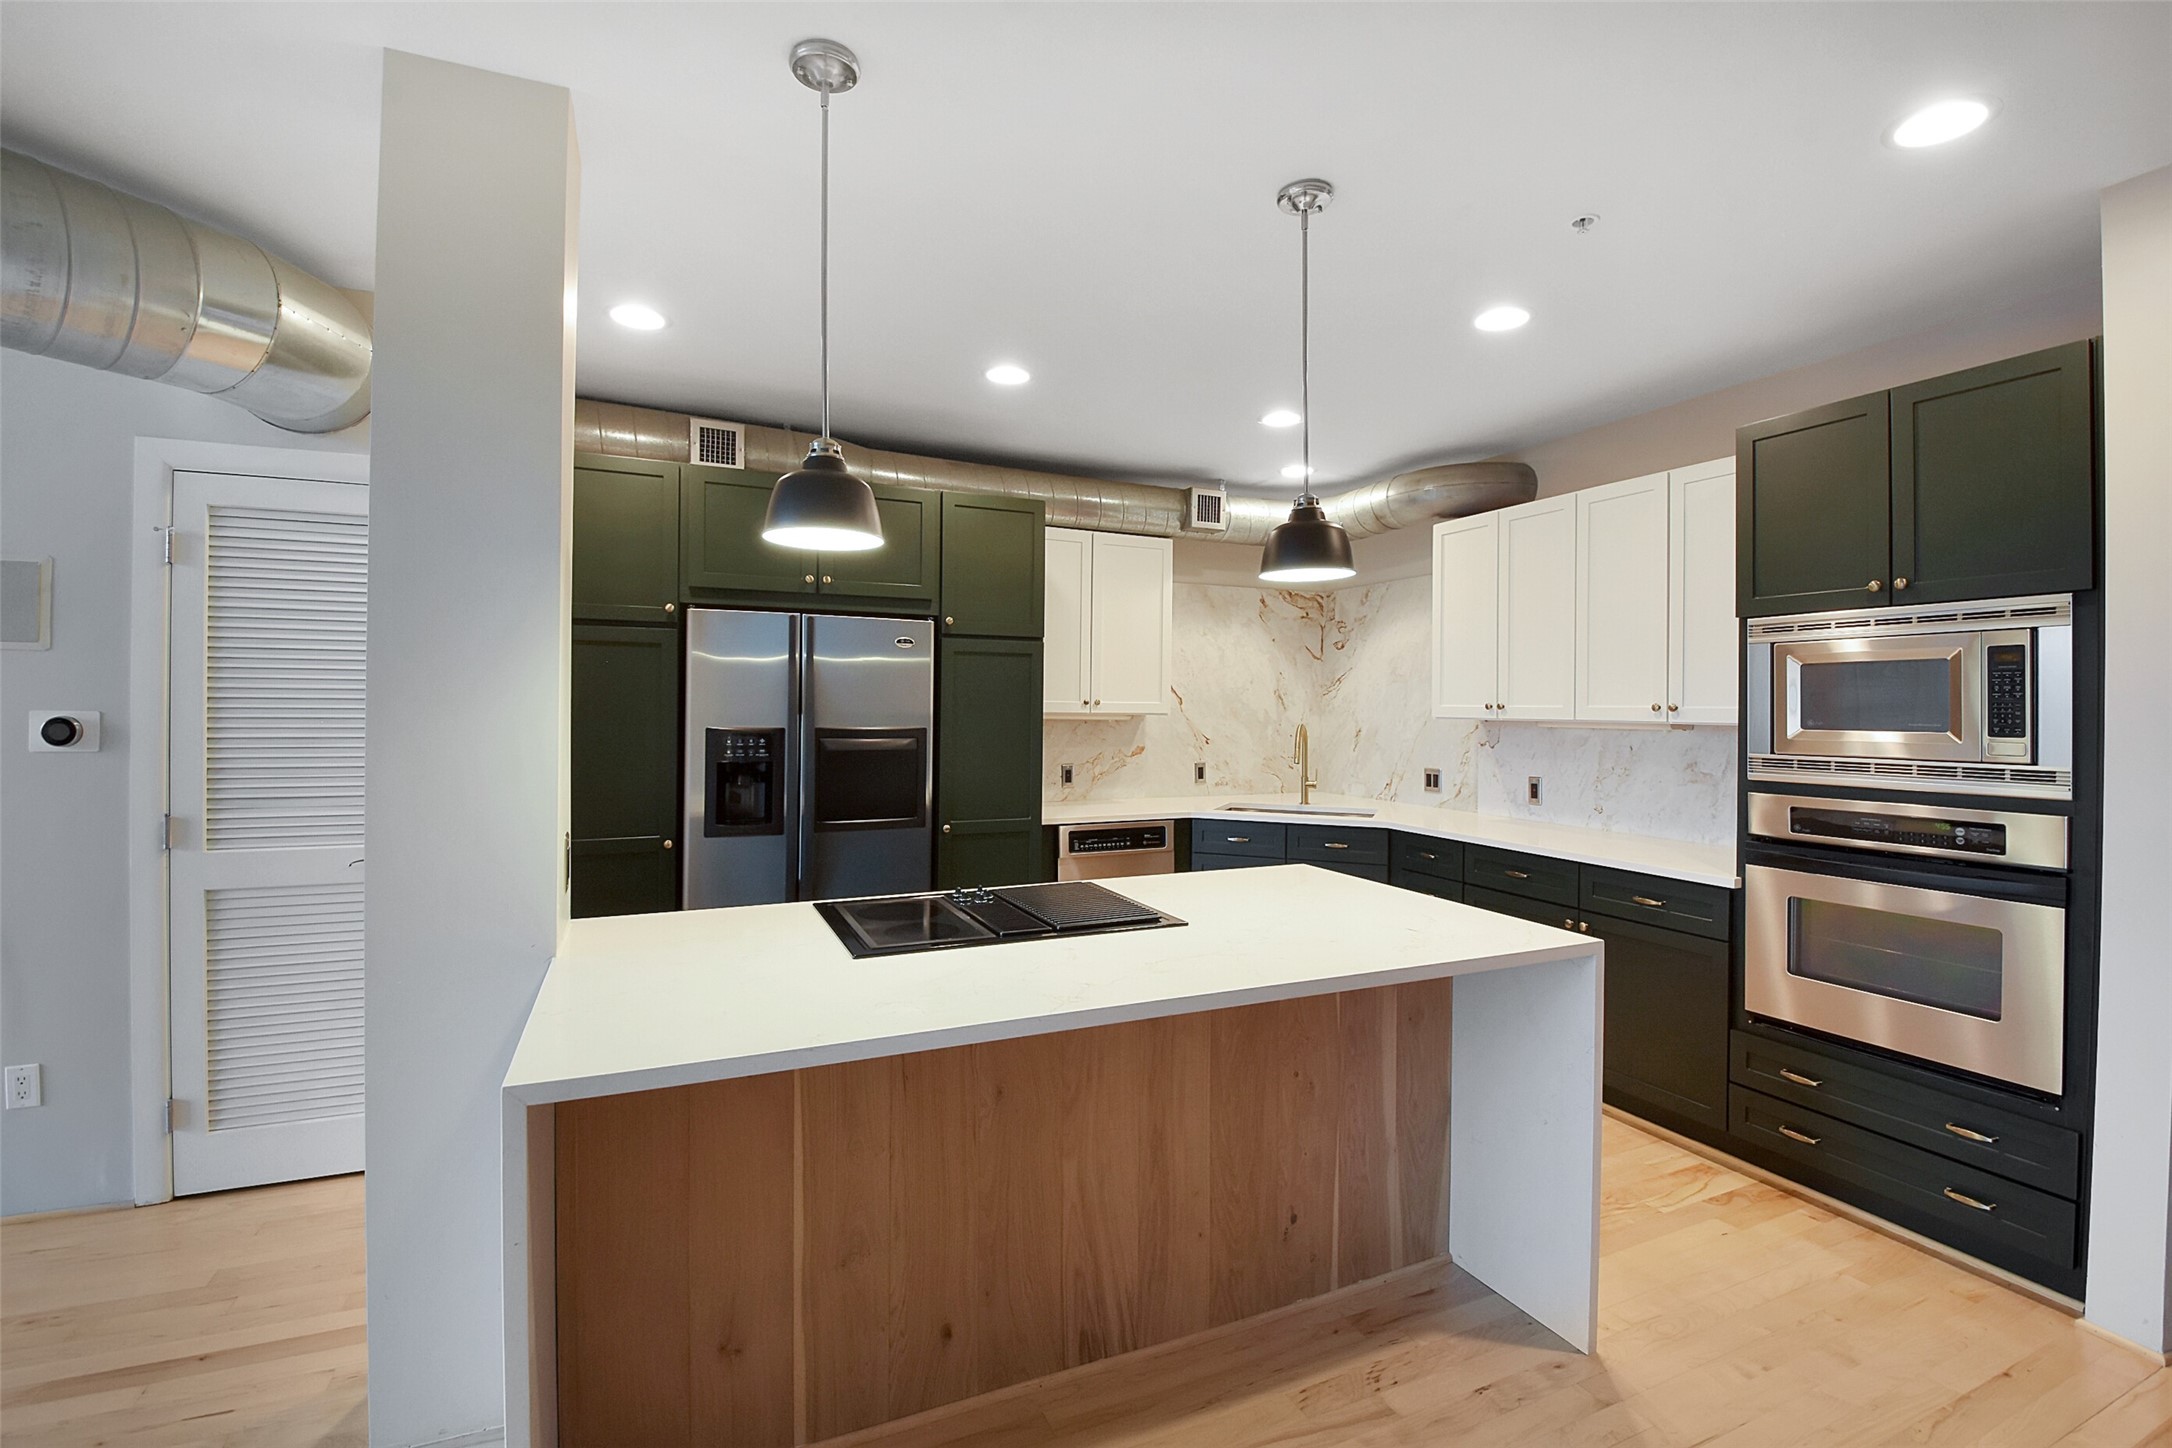 ADDITIONAL FEATURES INCLUDE STYLISH PENDANT AND RECESSED LIGHTING AND GLEAMING HARDWOOD FLOORING. THE ISLAND FEATURES ELECTRIC COOK TOP WITH GRIDDLE AND DOWN DRAFT VENTILATION. BONUS THE REFRIGERATOR STAYS!